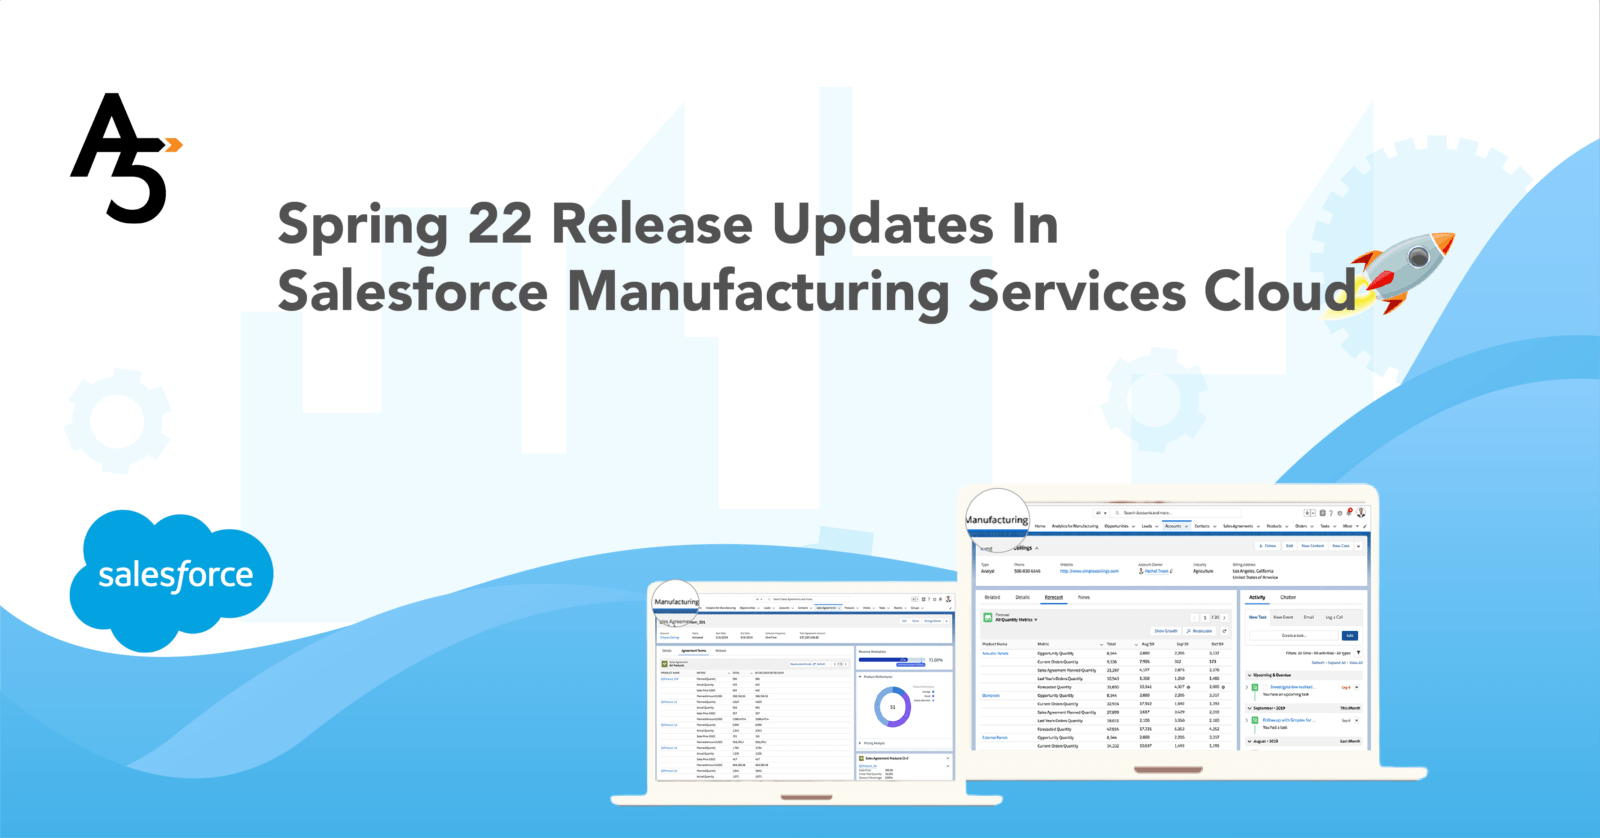 Spring 22 Release Updates for Manufacturing Cloud